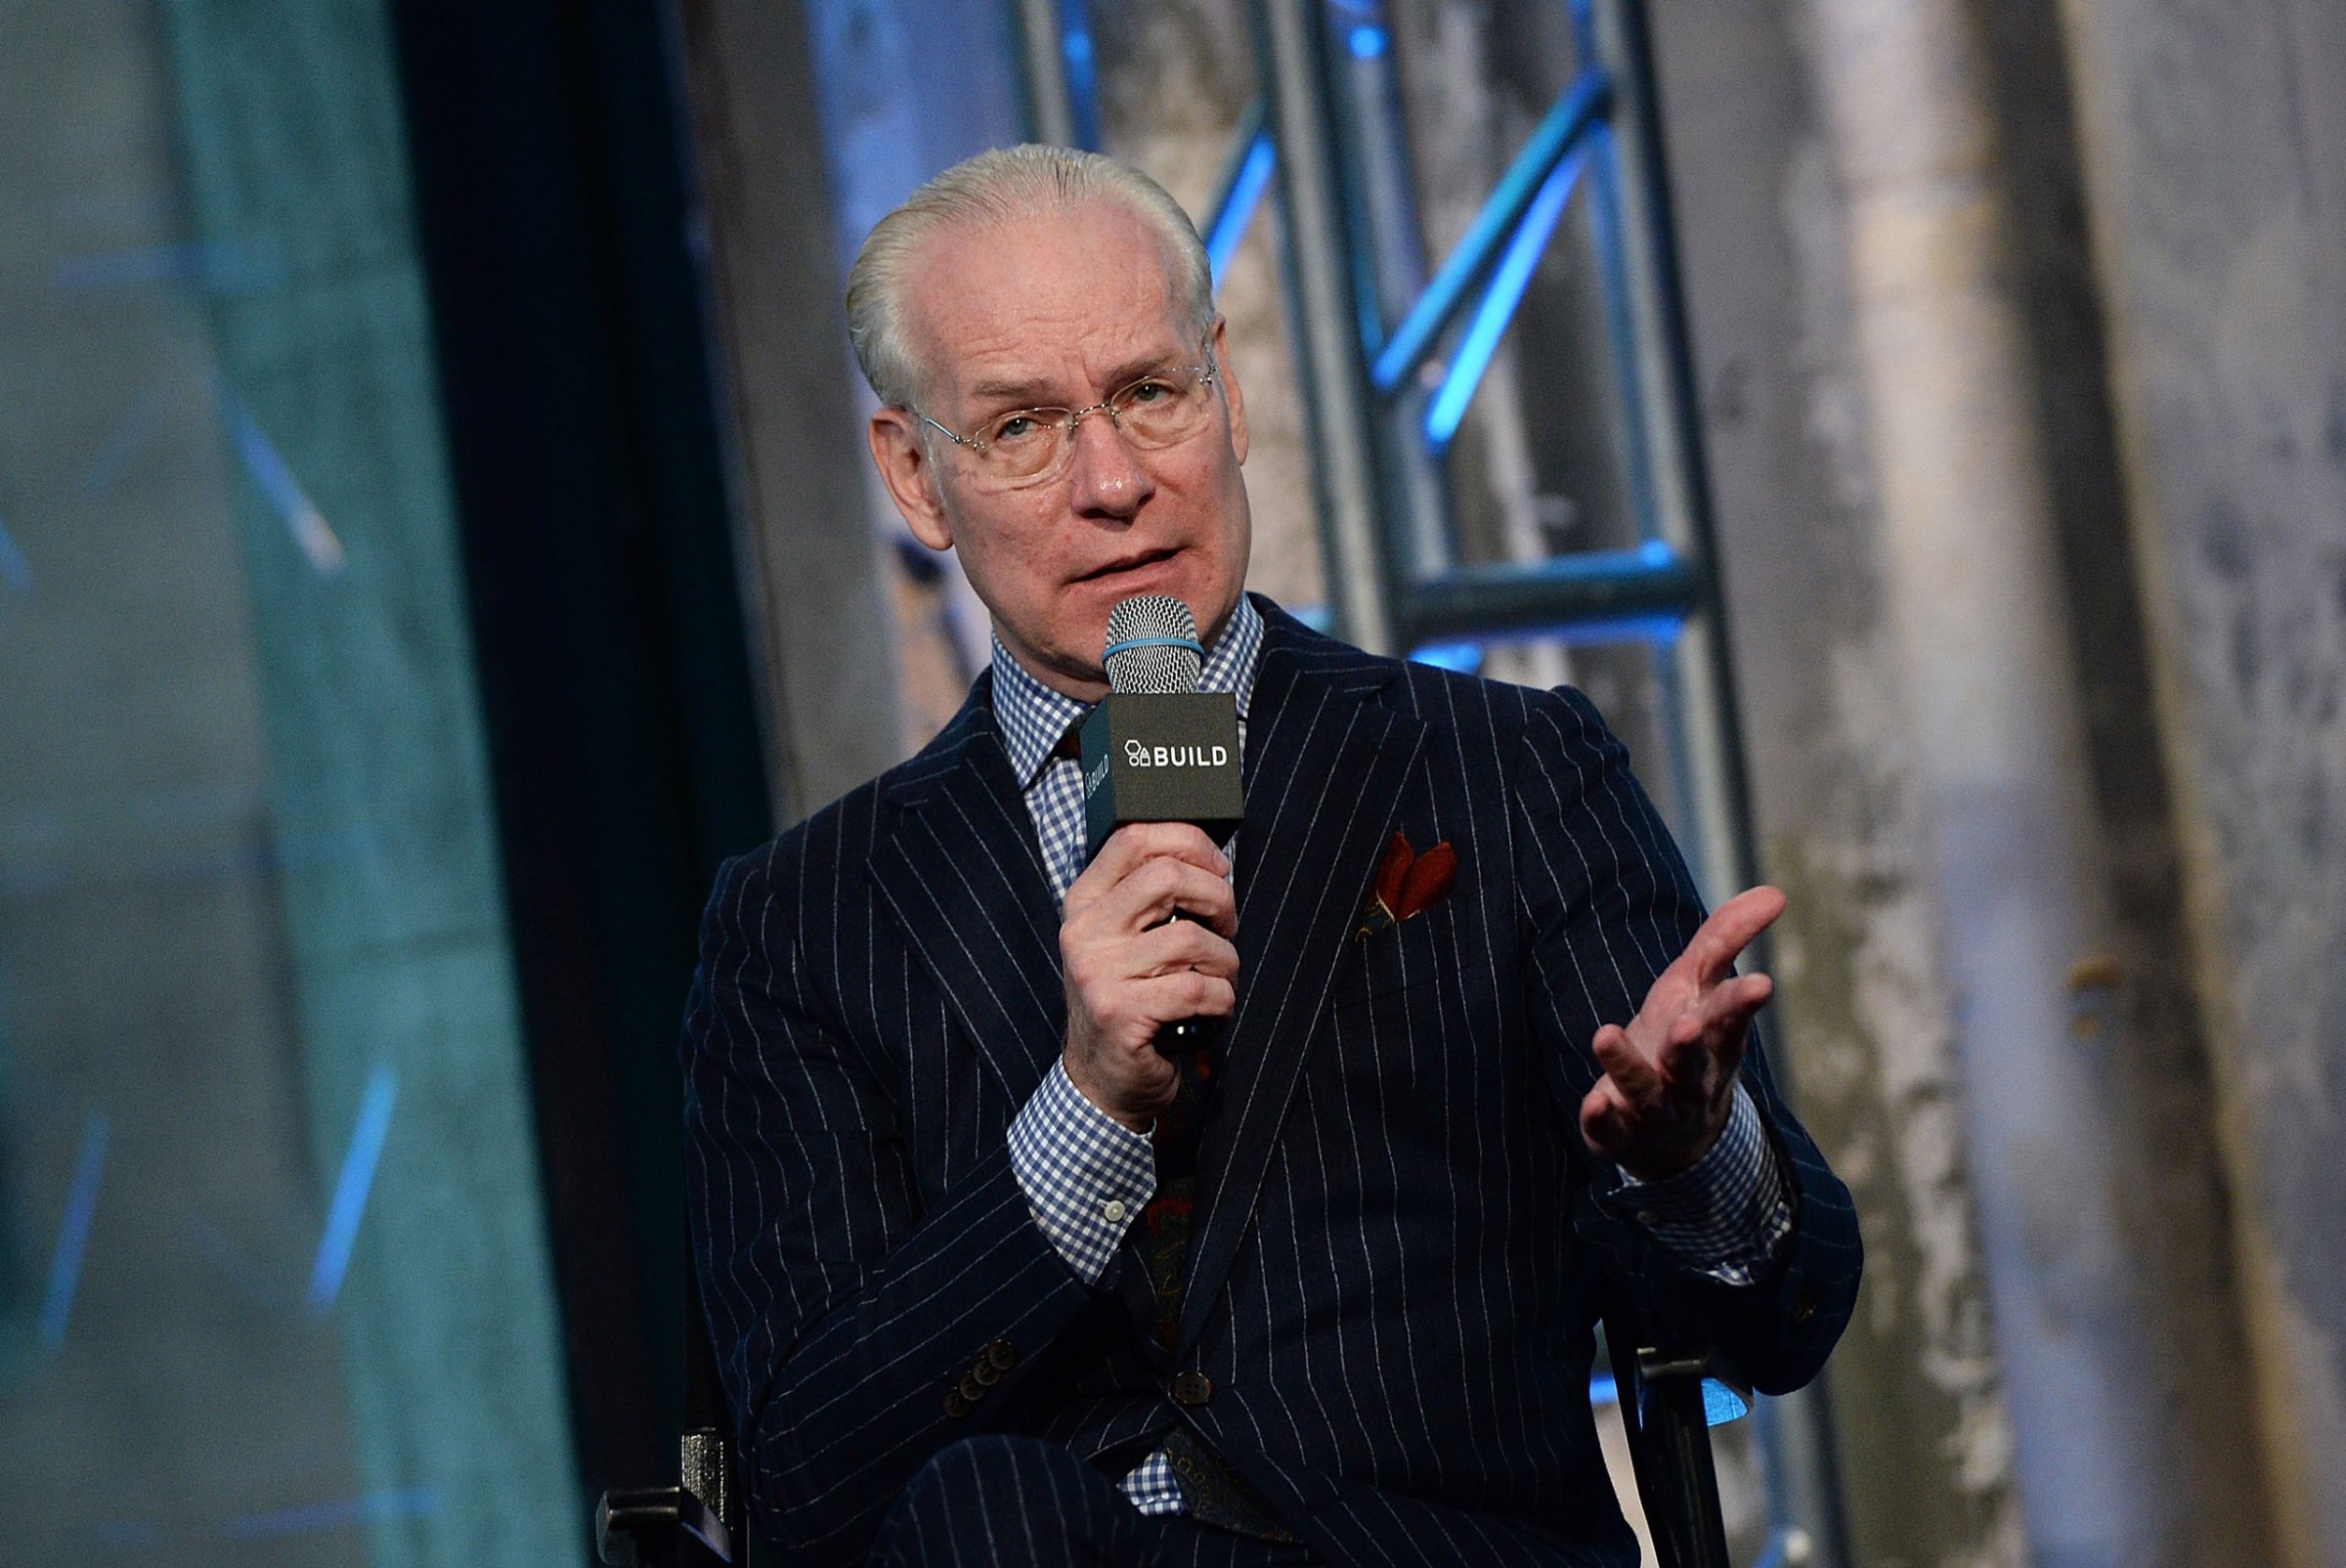 NEW YORK, NY - NOVEMBER 05: TV personality Tim Gunn visits AOL BUIL to discuss the upcoming season of "Project Runway Junior" at AOL Studios In New York on November 5, 2015 in New York City. (Photo by Slaven Vlasic/Getty Images)